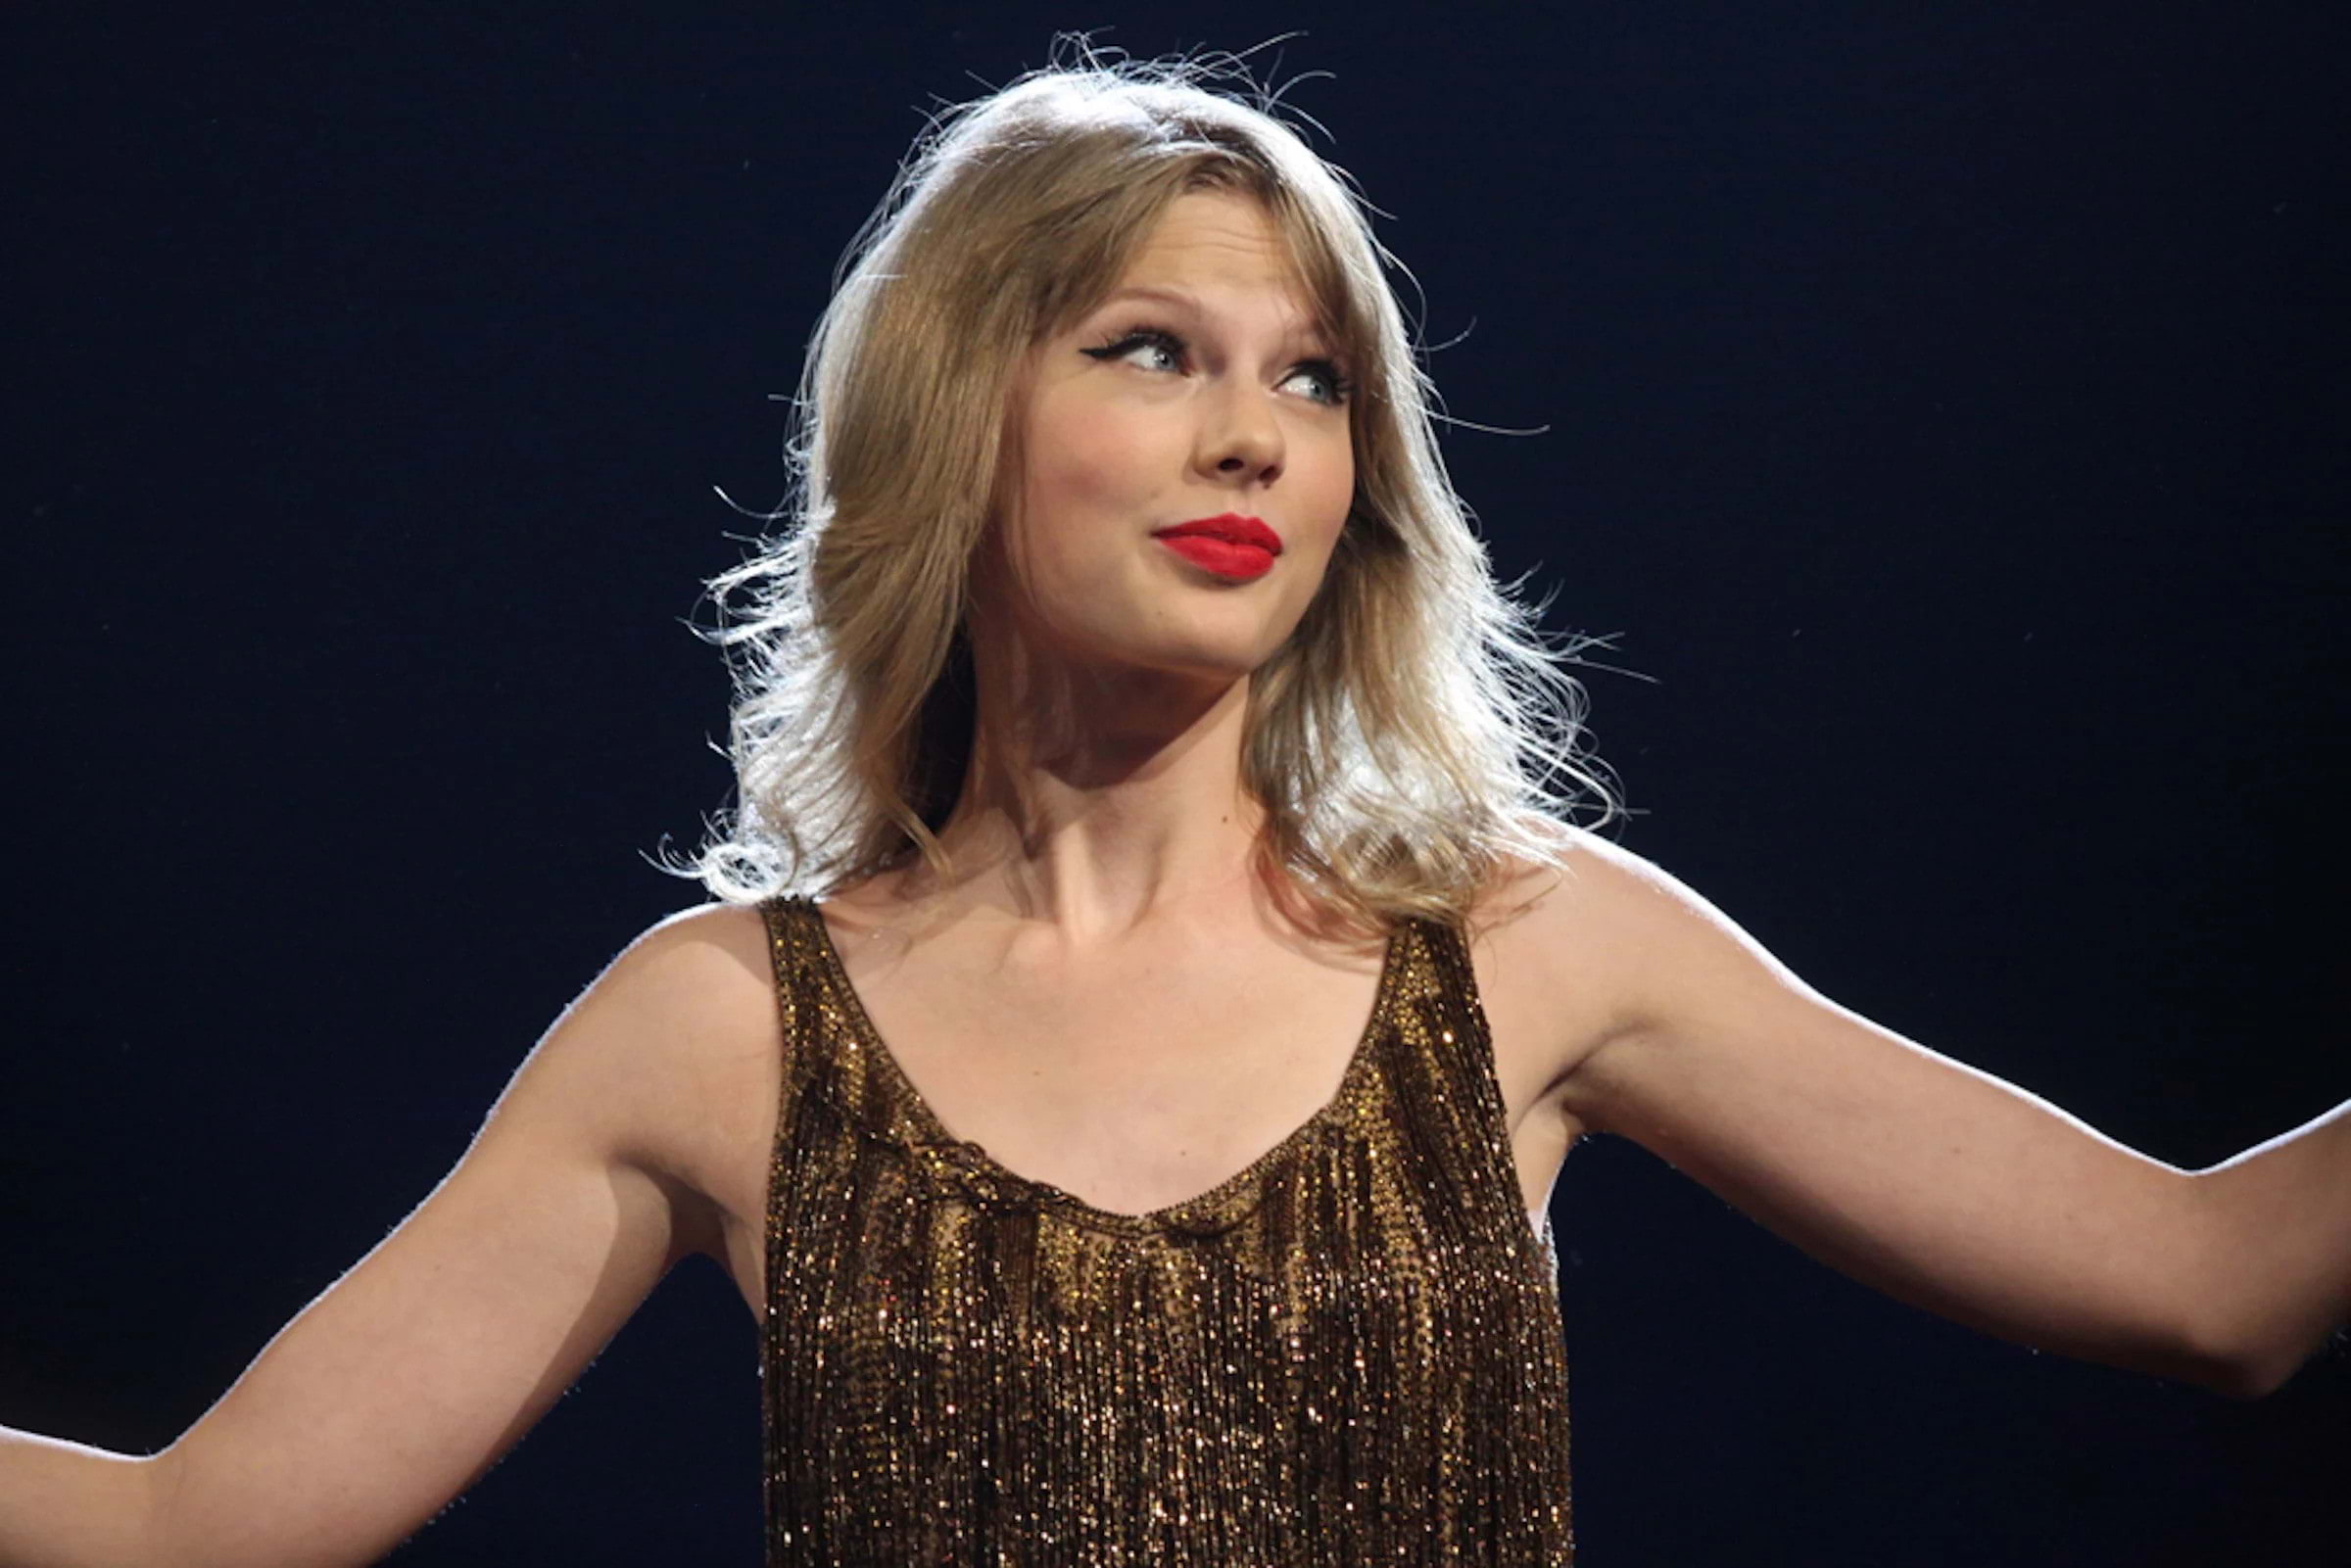 Taylor Swift takes over Stockholm - three sold-out concerts at Friends Arena